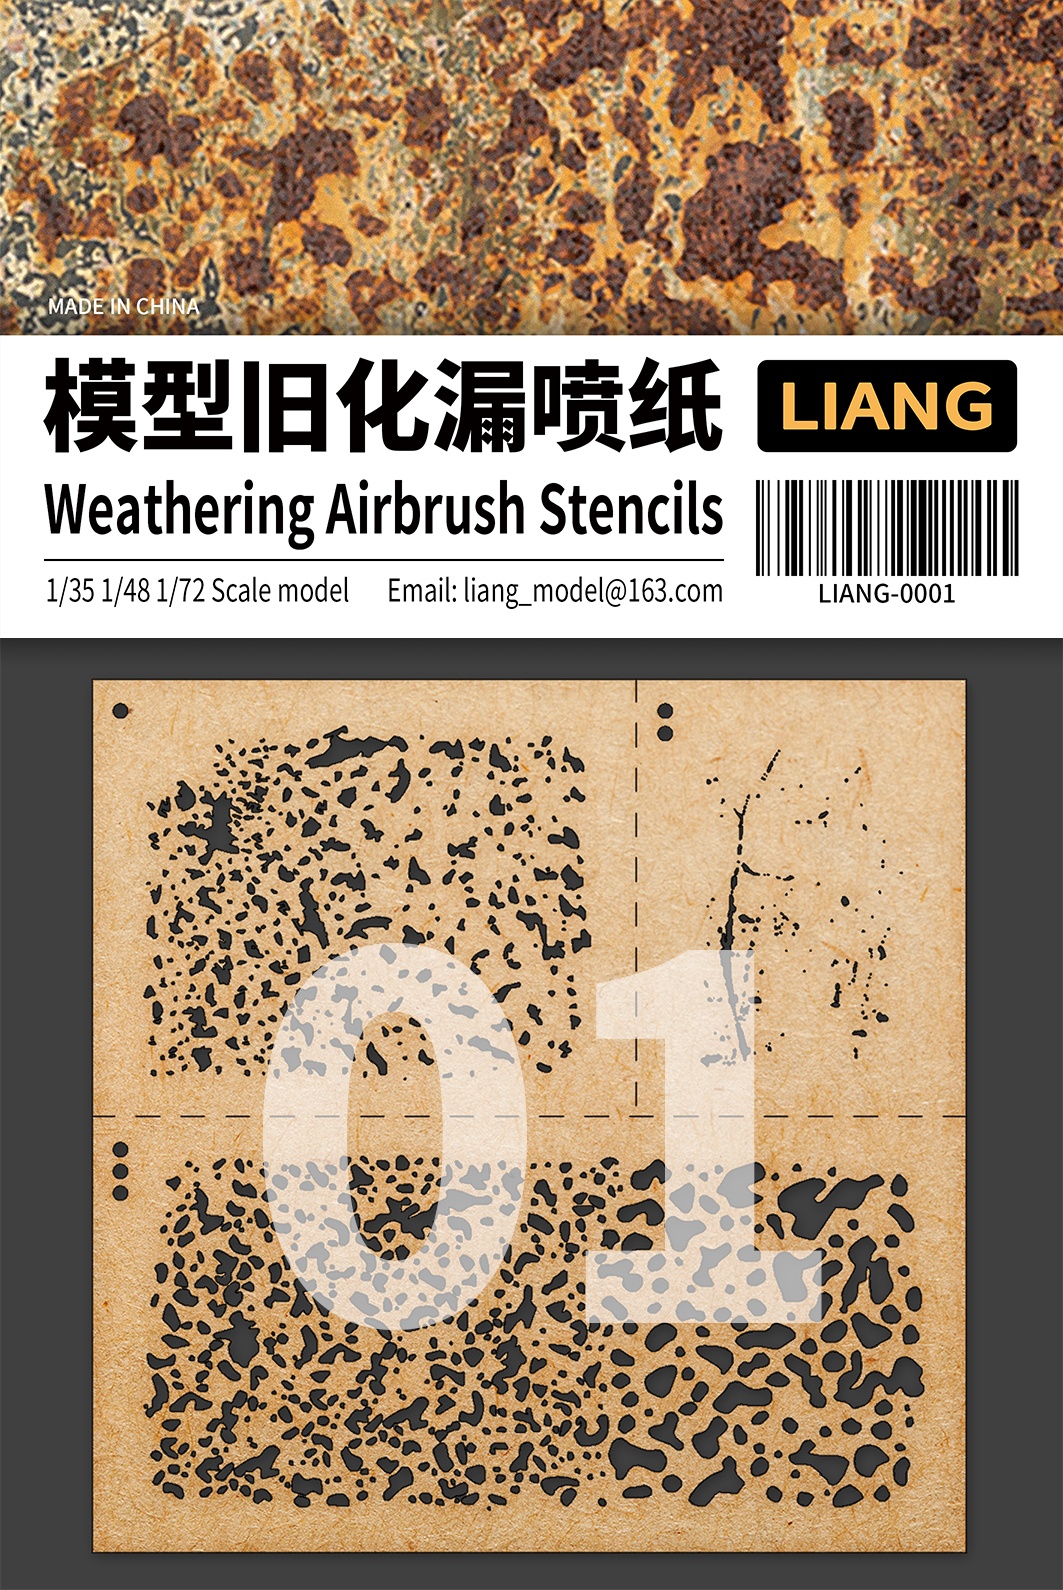 For 1/35 1/48 1/72 Scale Models DIY Decoration Weathering Airbrush Stencils Tool 